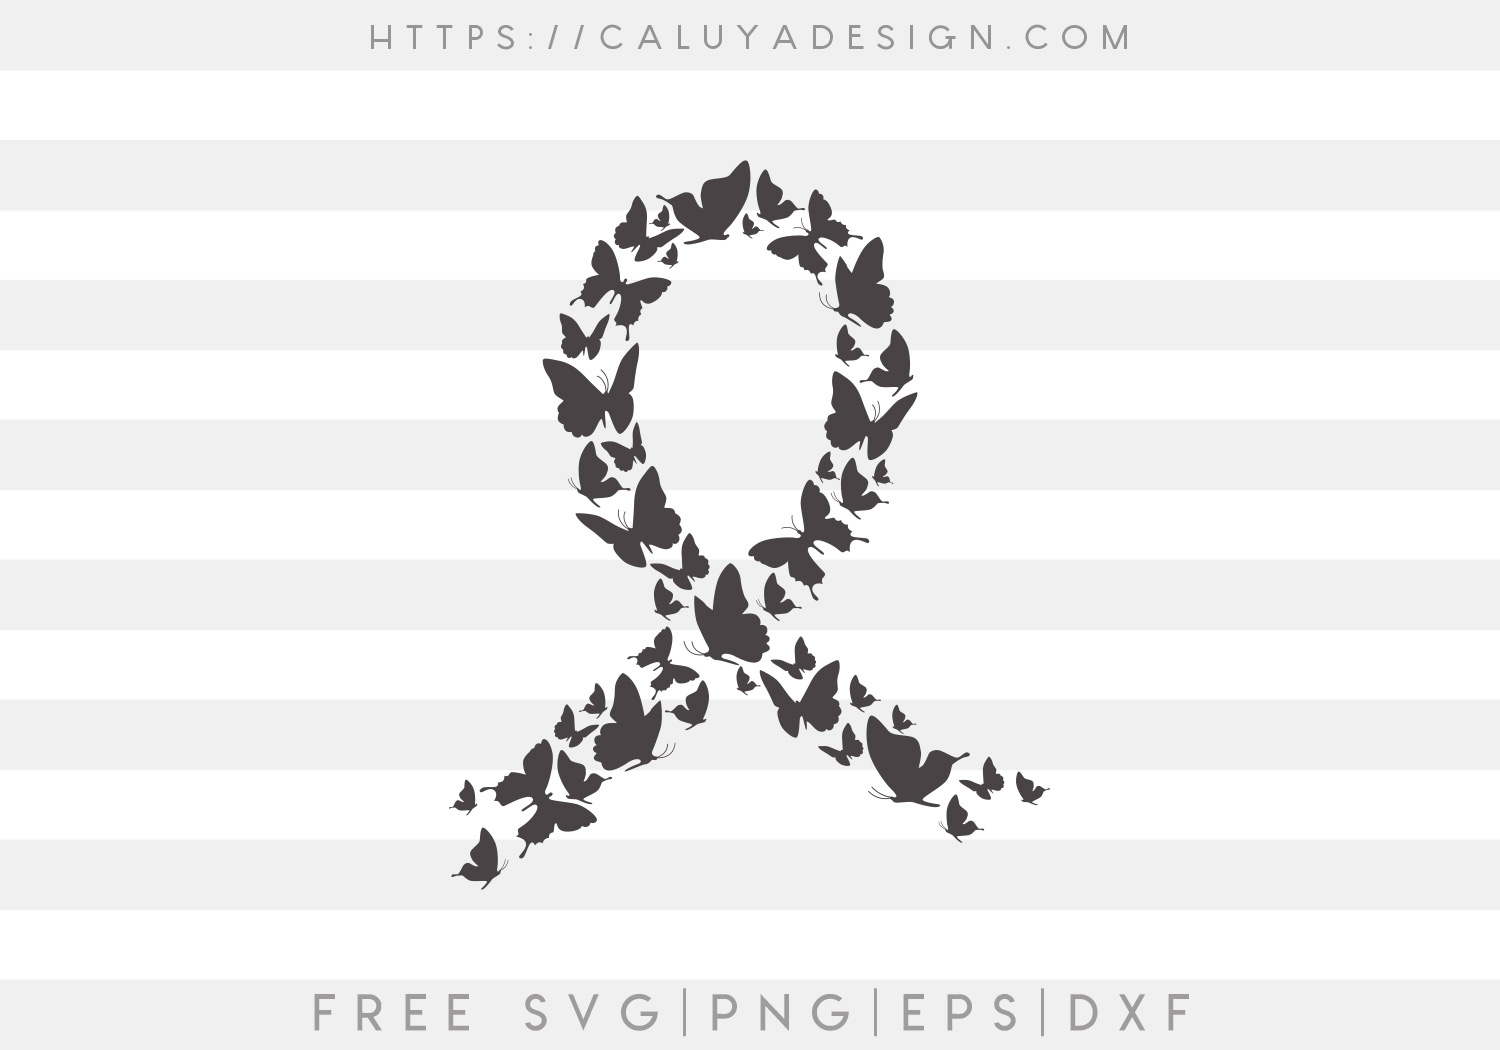 Free Butterfly Ribbon SVG, PNG, EPS & DXF by Caluya Design